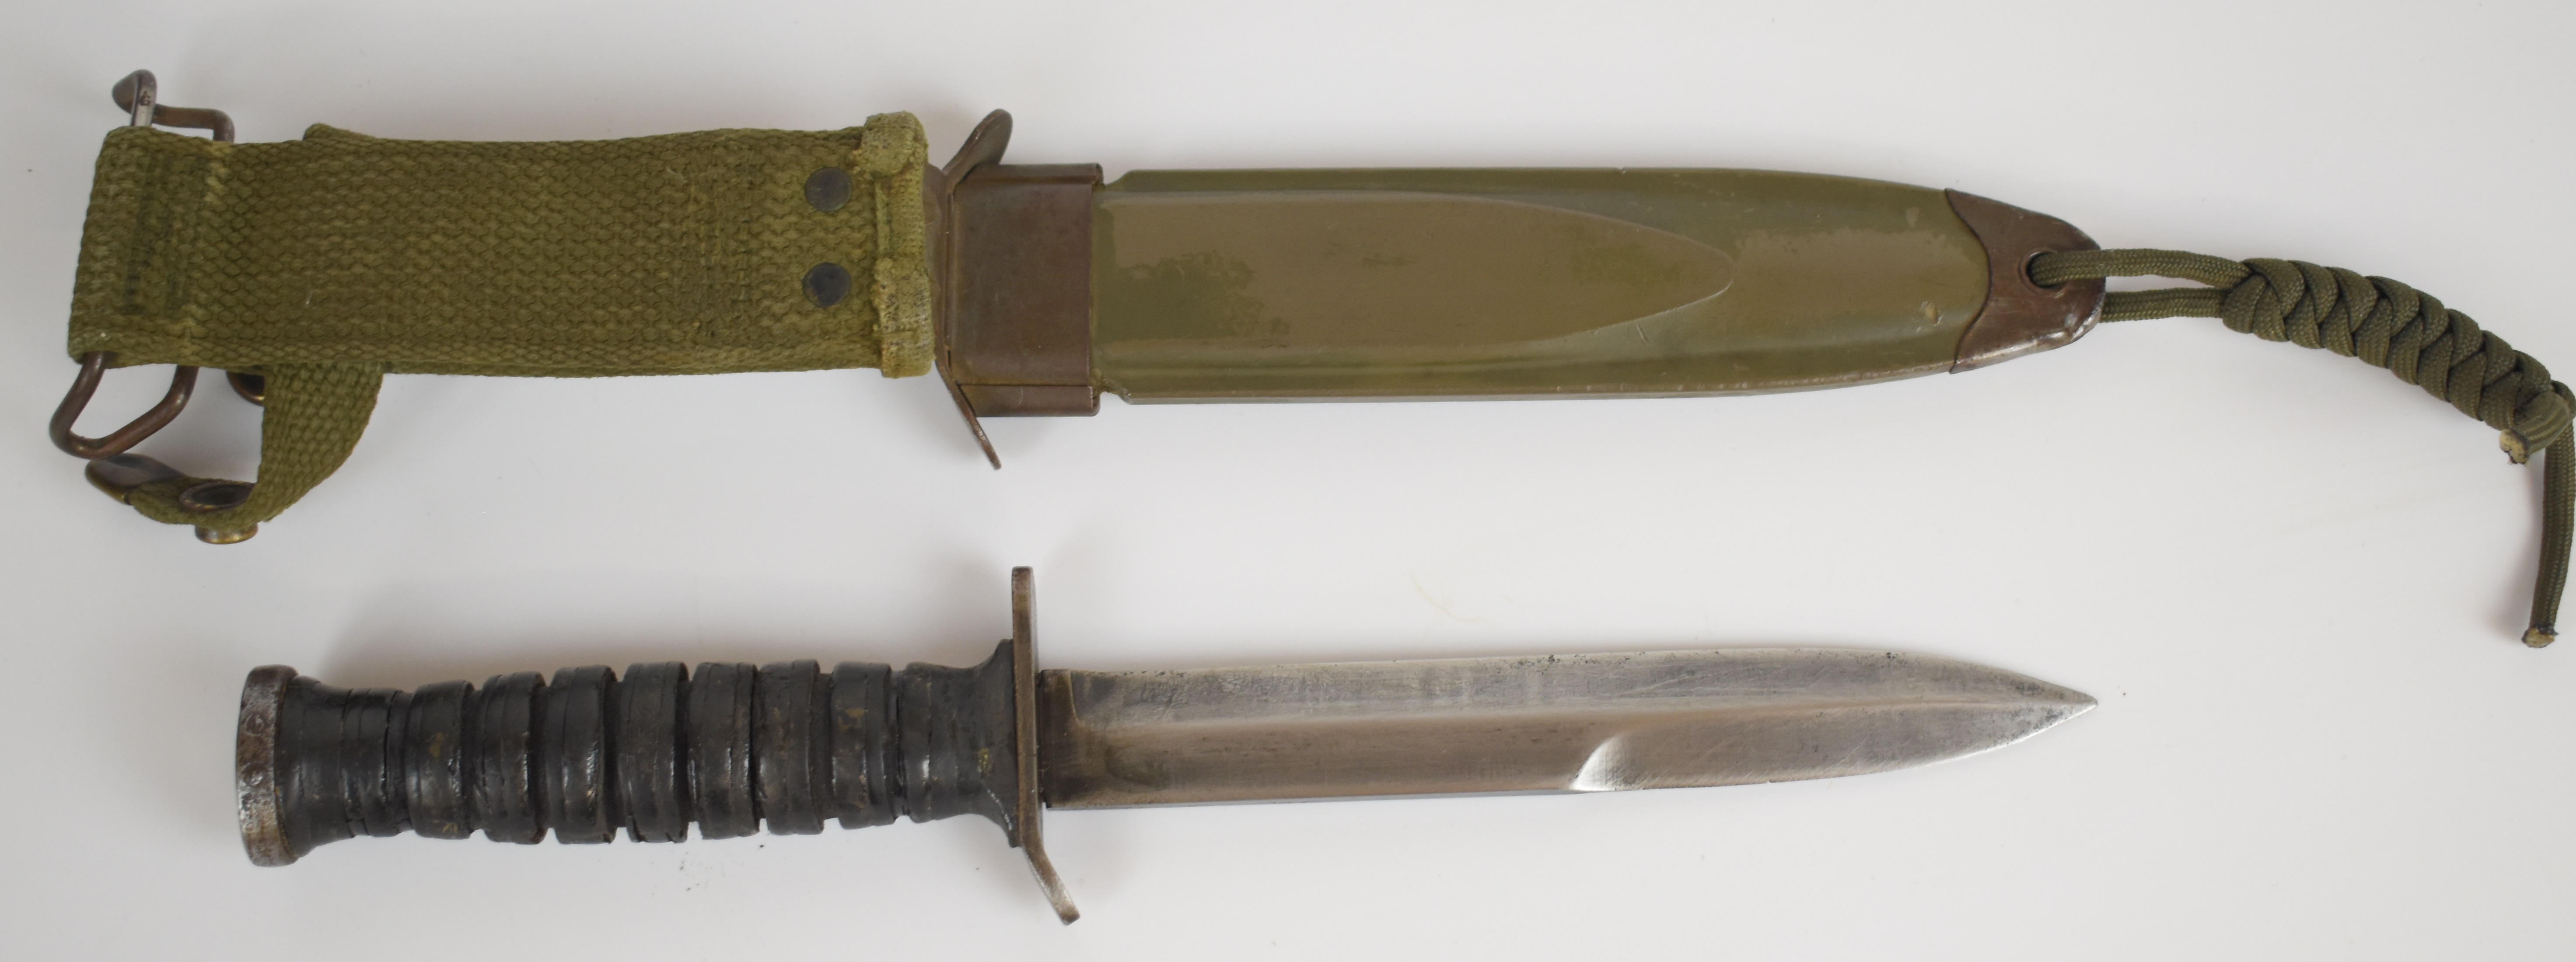 American WW2 fighting knife with leather grip, 16.5cm double edged blade and scabbard stamped US - Image 3 of 4